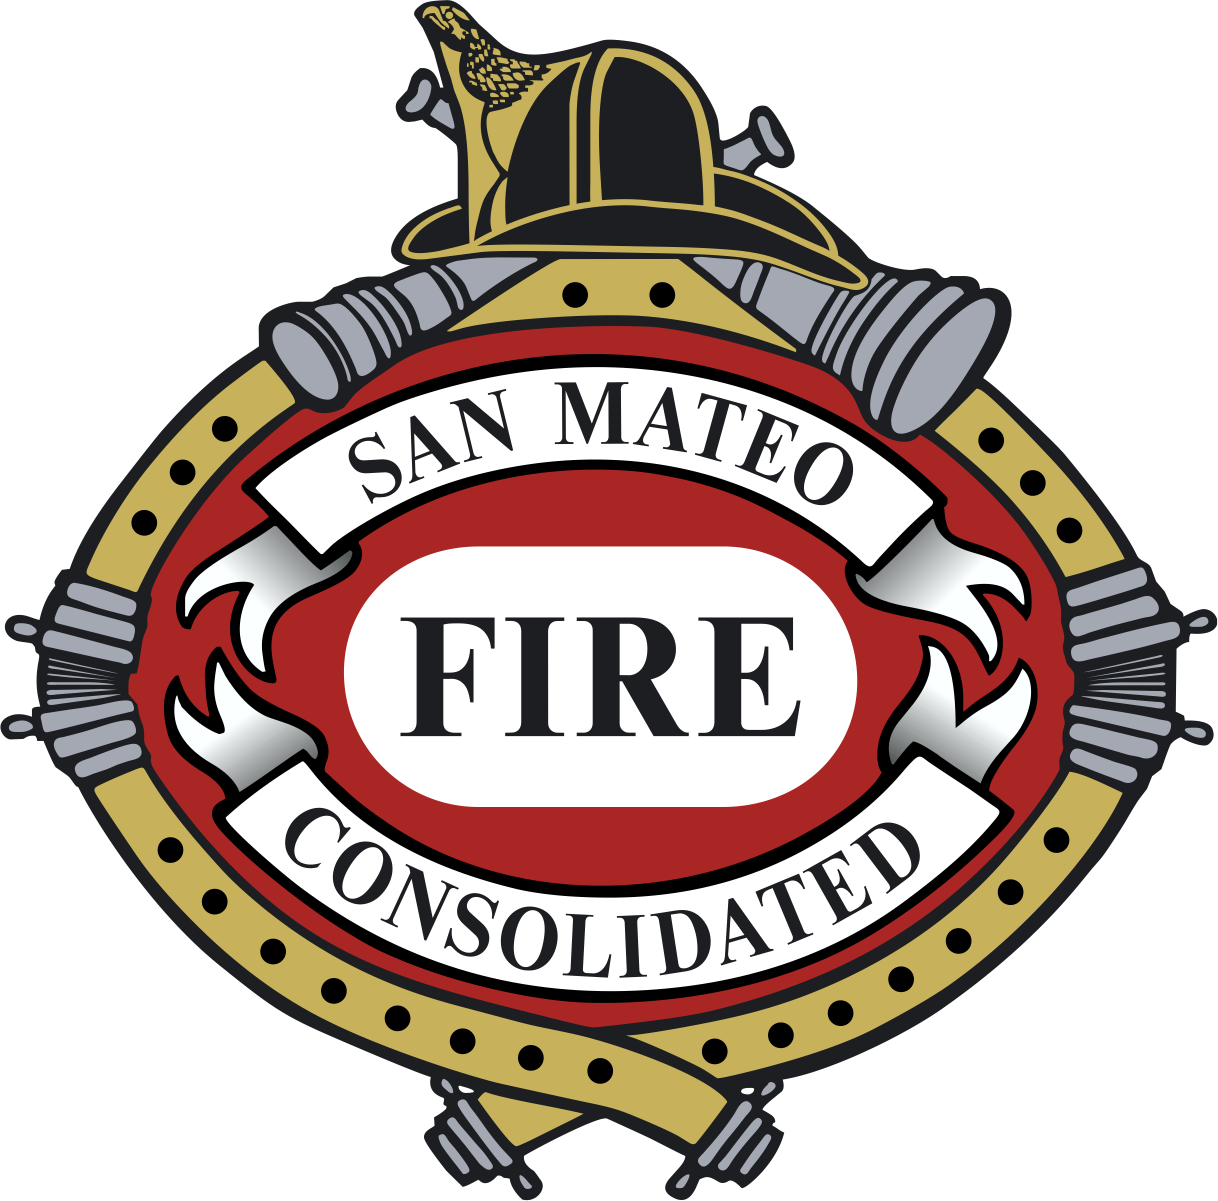 Events from February 15, 2021 – November 26, 2021 – SMC Fire